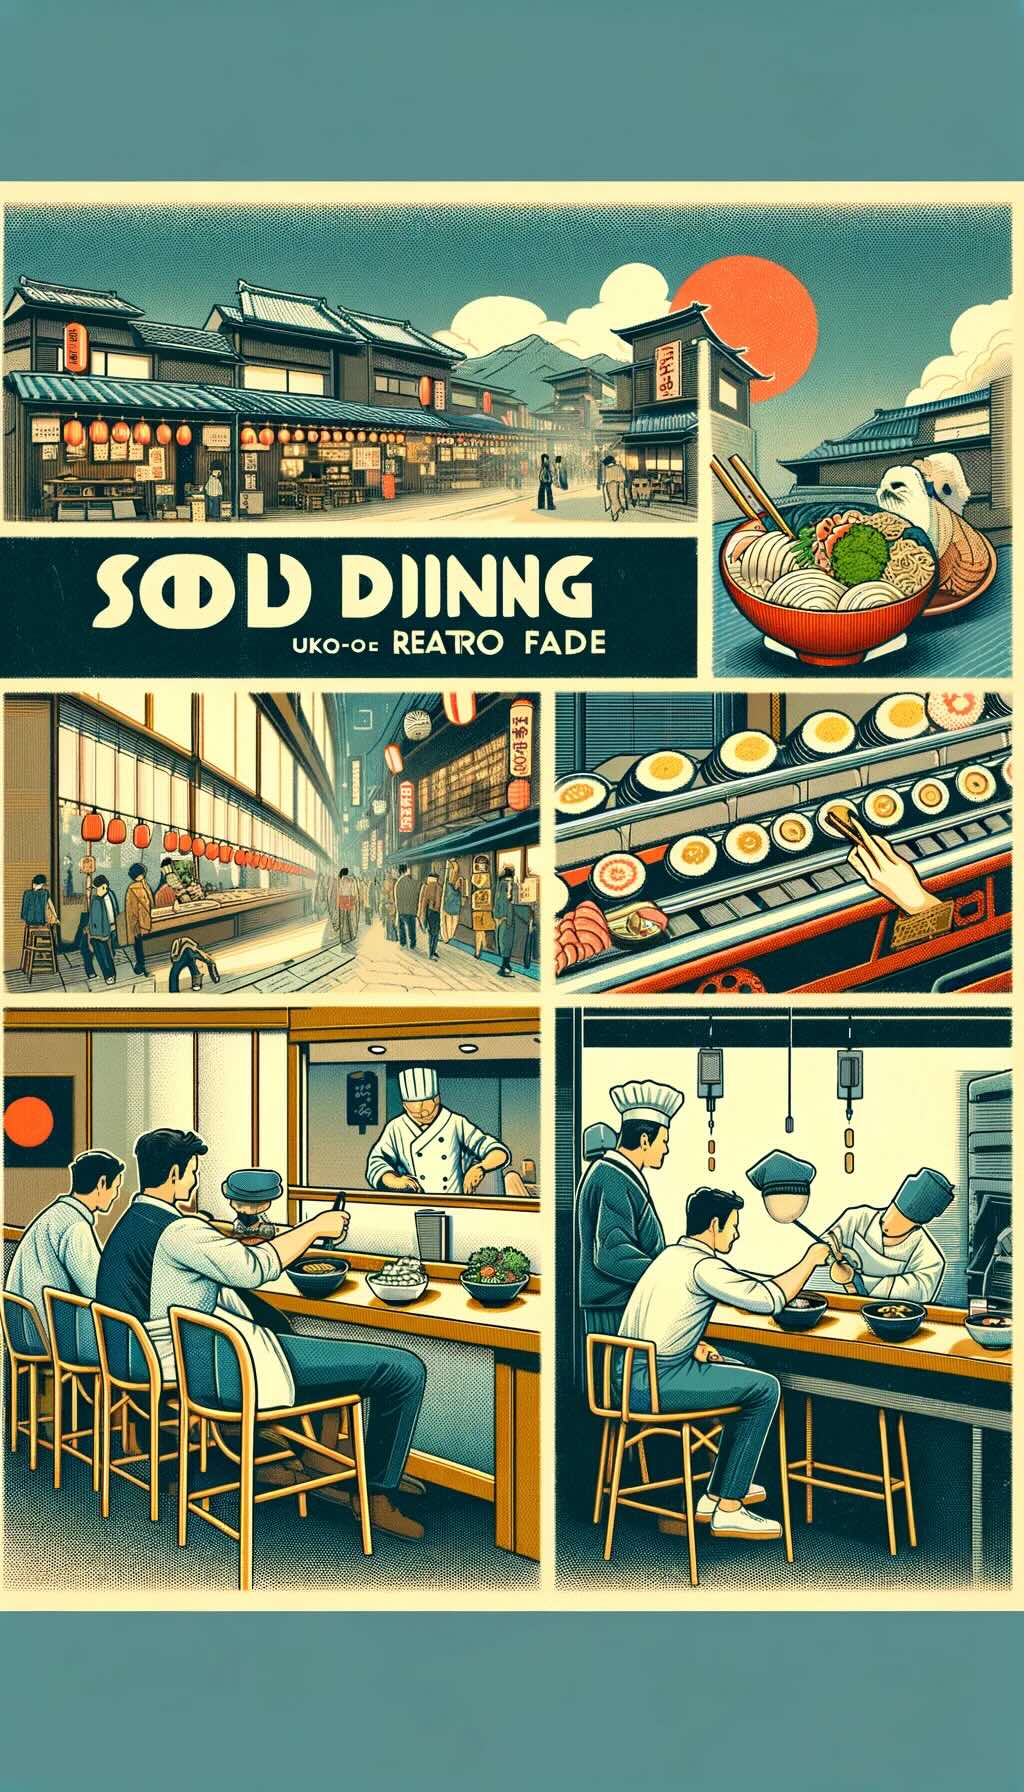 Solo dining experiences in Japan. The image captures scenes from various Japanese eateries, highlighting the unique solo dining culture and the vibrant gastronomic landscape of Japan